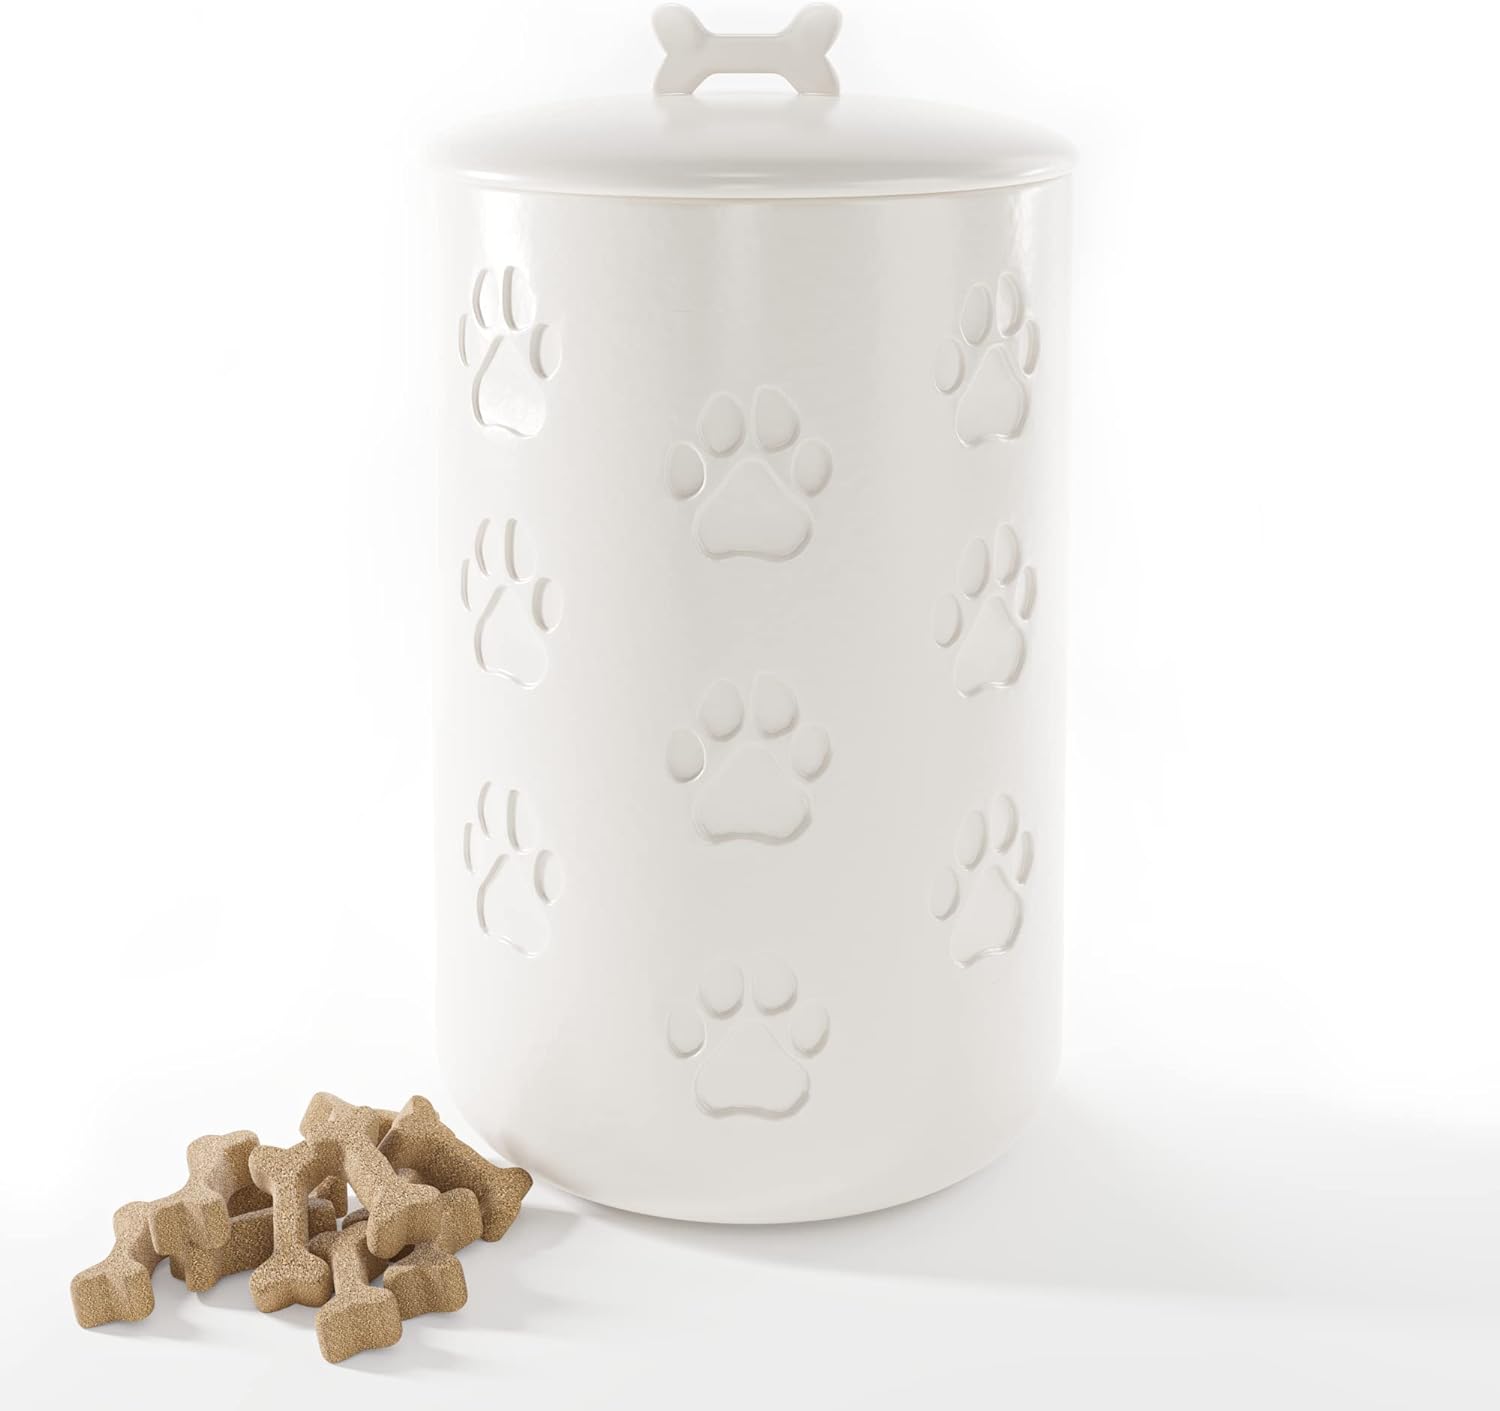 Dog Treat Container Airtight - 5\" Round x 9\" Tall Ceramic Dog Treat Jar with Lid - White Dog Treat Canister - Large Dog Cookie Jar for Dogs - Pet Treat Container Airtight - Dog Treat Jars for Pets